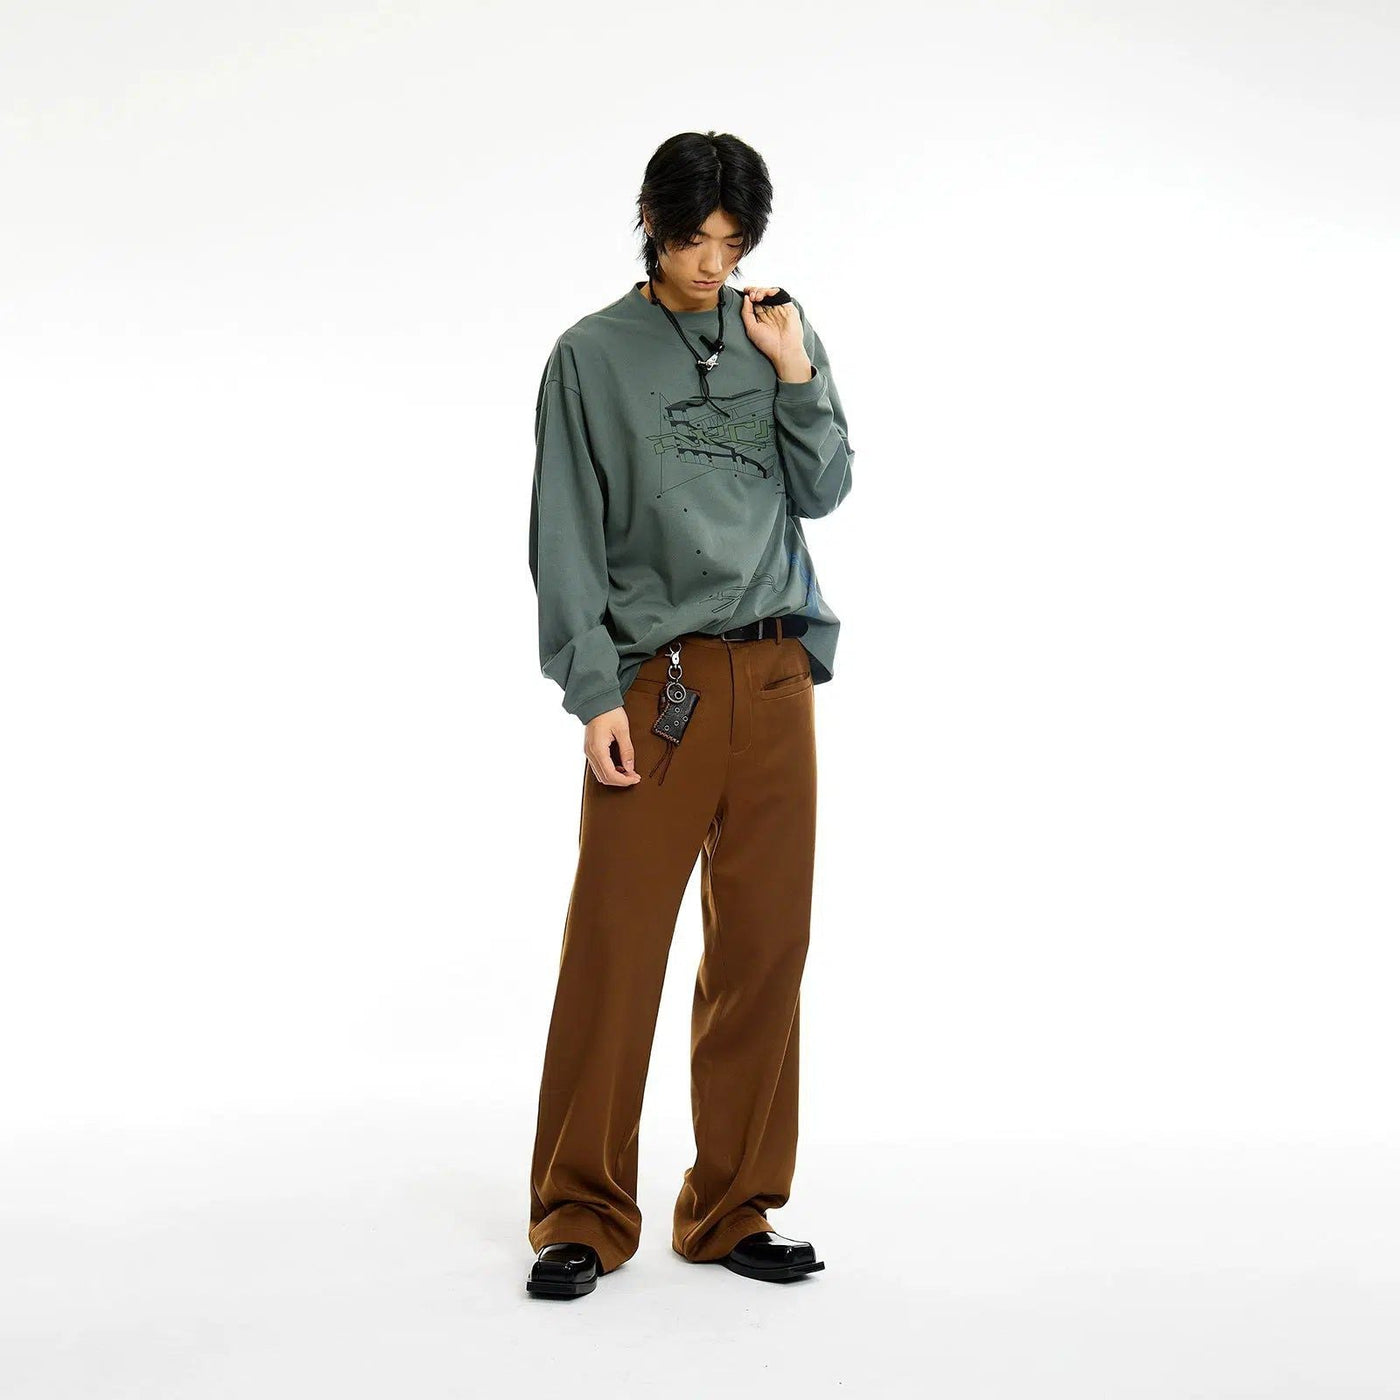 Front Pocket Drapey Pants Korean Street Fashion Pants By Roaring Wild Shop Online at OH Vault